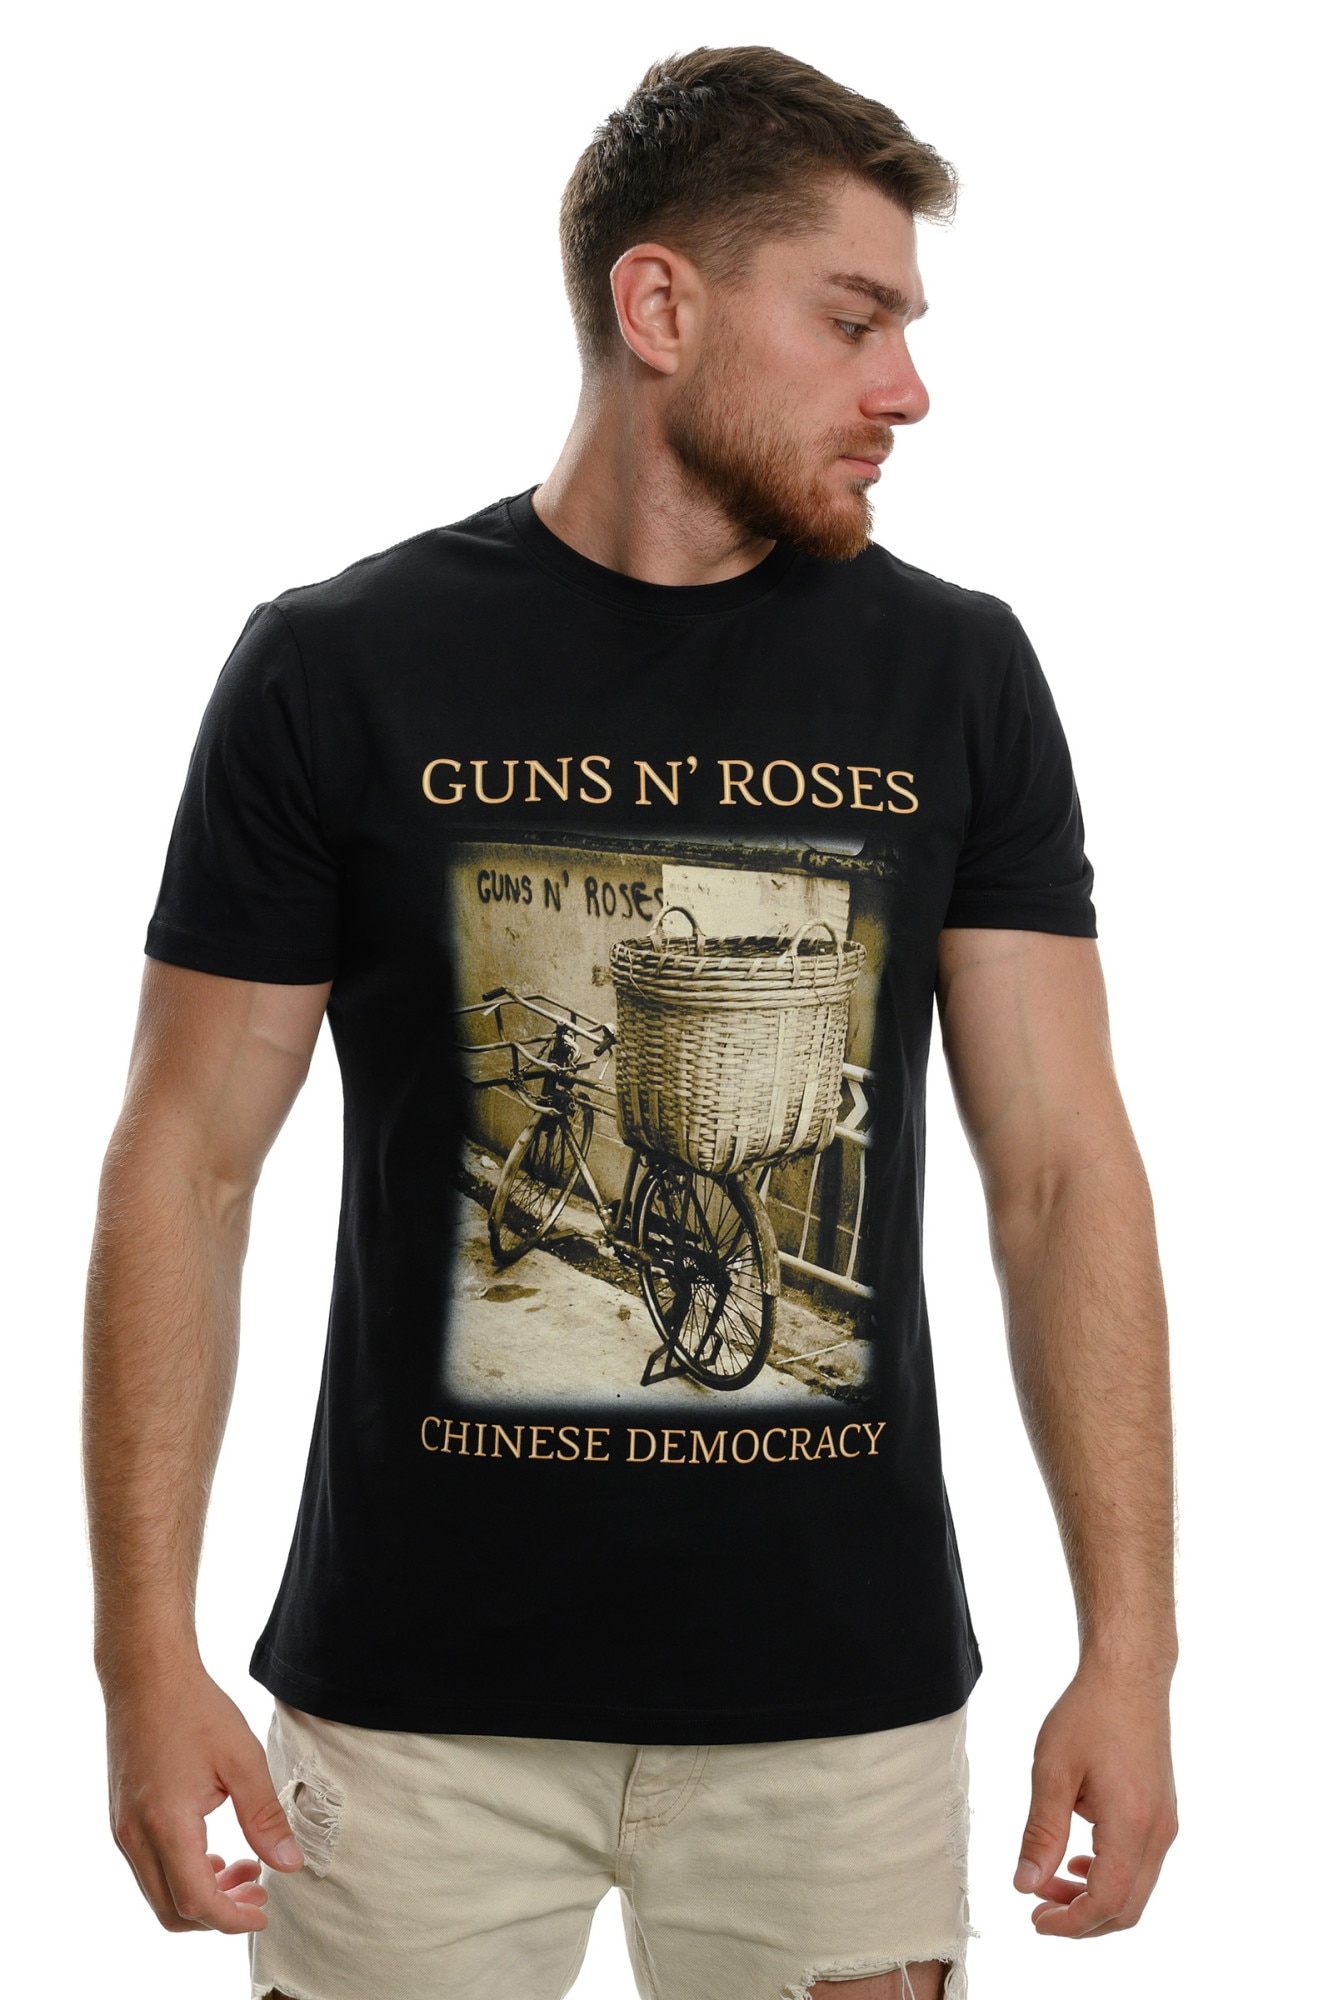 scientist Getting worse Extremely important Tricou pentru barbati Printex, Guns N' Roses, Chinese Democracy, Front and  Back print, Negru - eMAG.ro